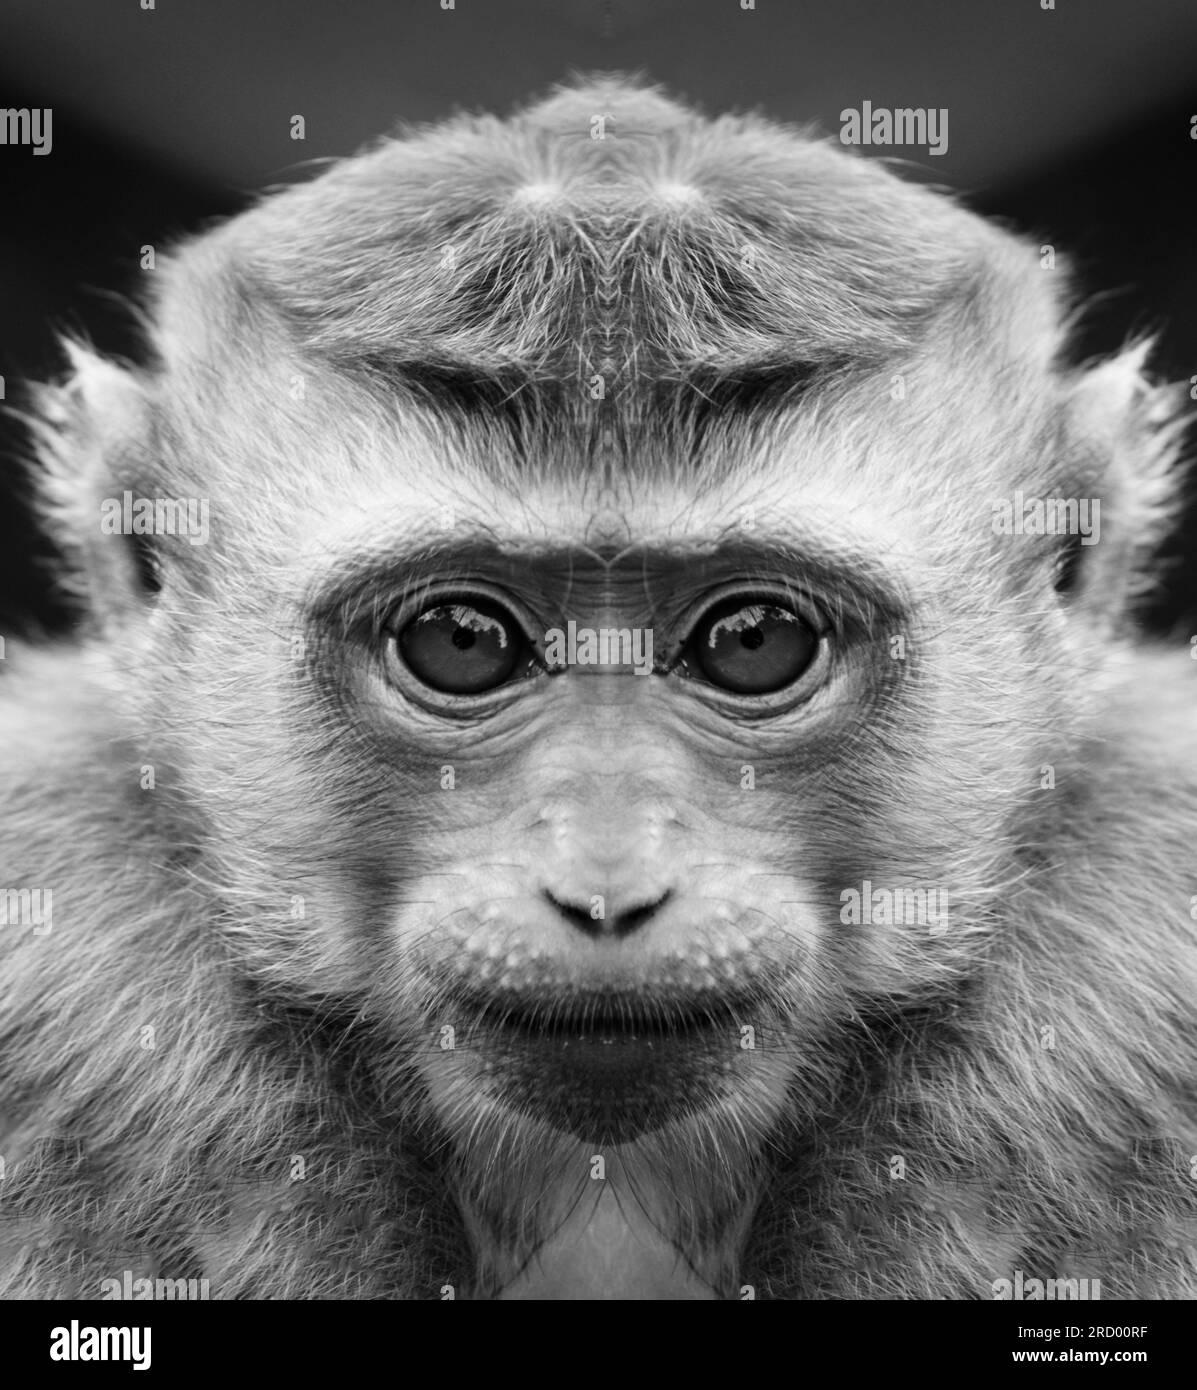 A beautiful black and white portrait of a monkey at close range that looks at the camera. Macaca. Stock Photo